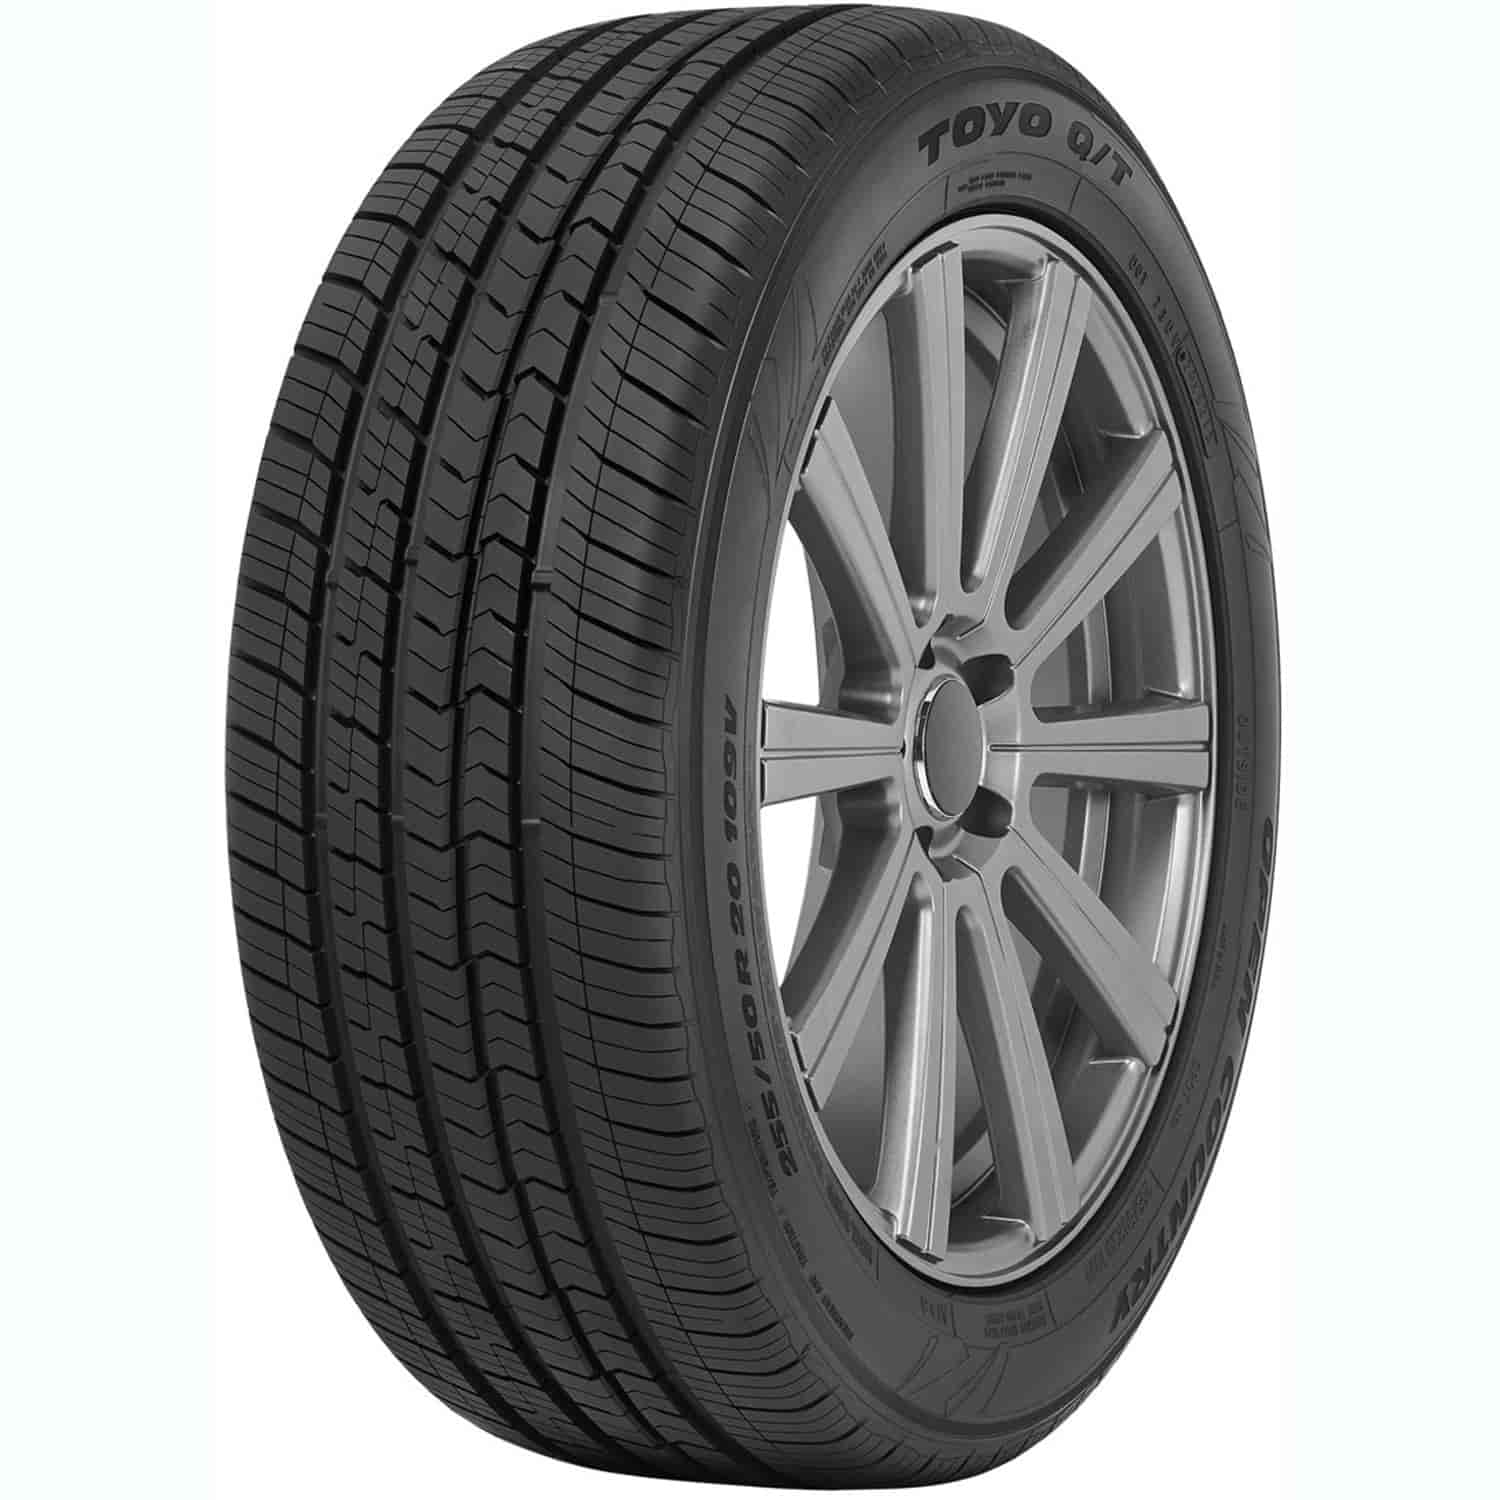 OPEN COUNTRY Q/T 265/50R20 111V XL